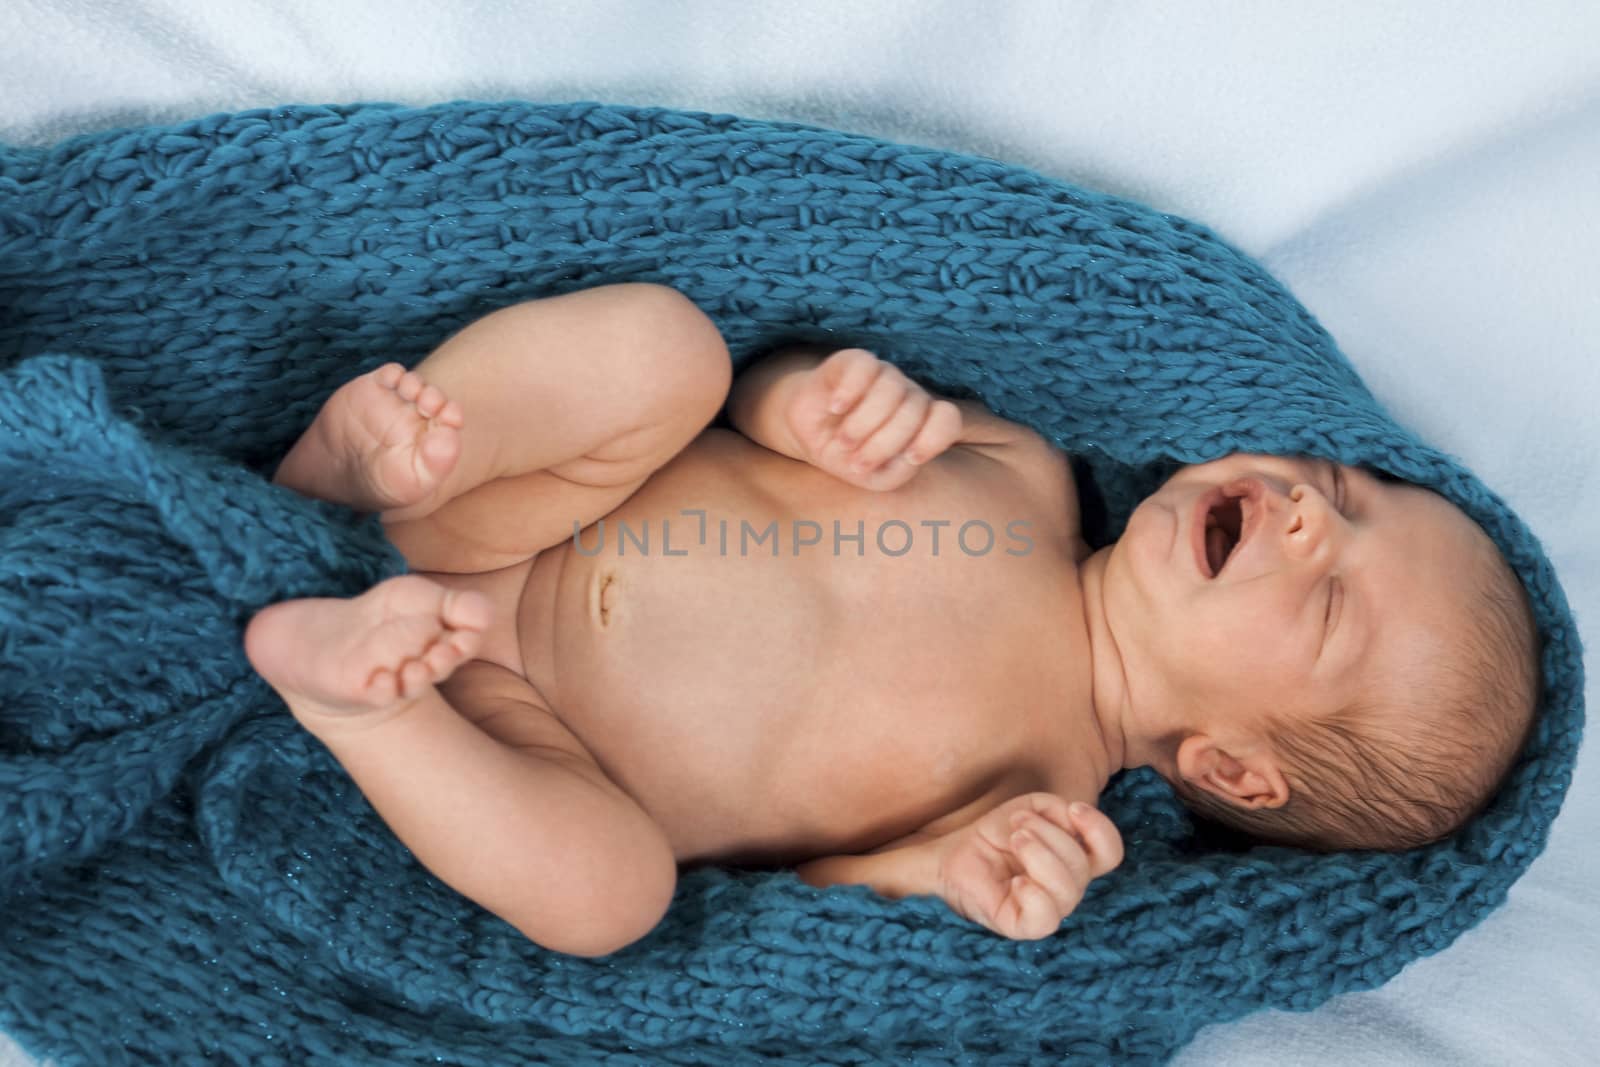 Close up Cute White New Born Baby Lying in Prone on White Cotton Cloth with Open Mouth